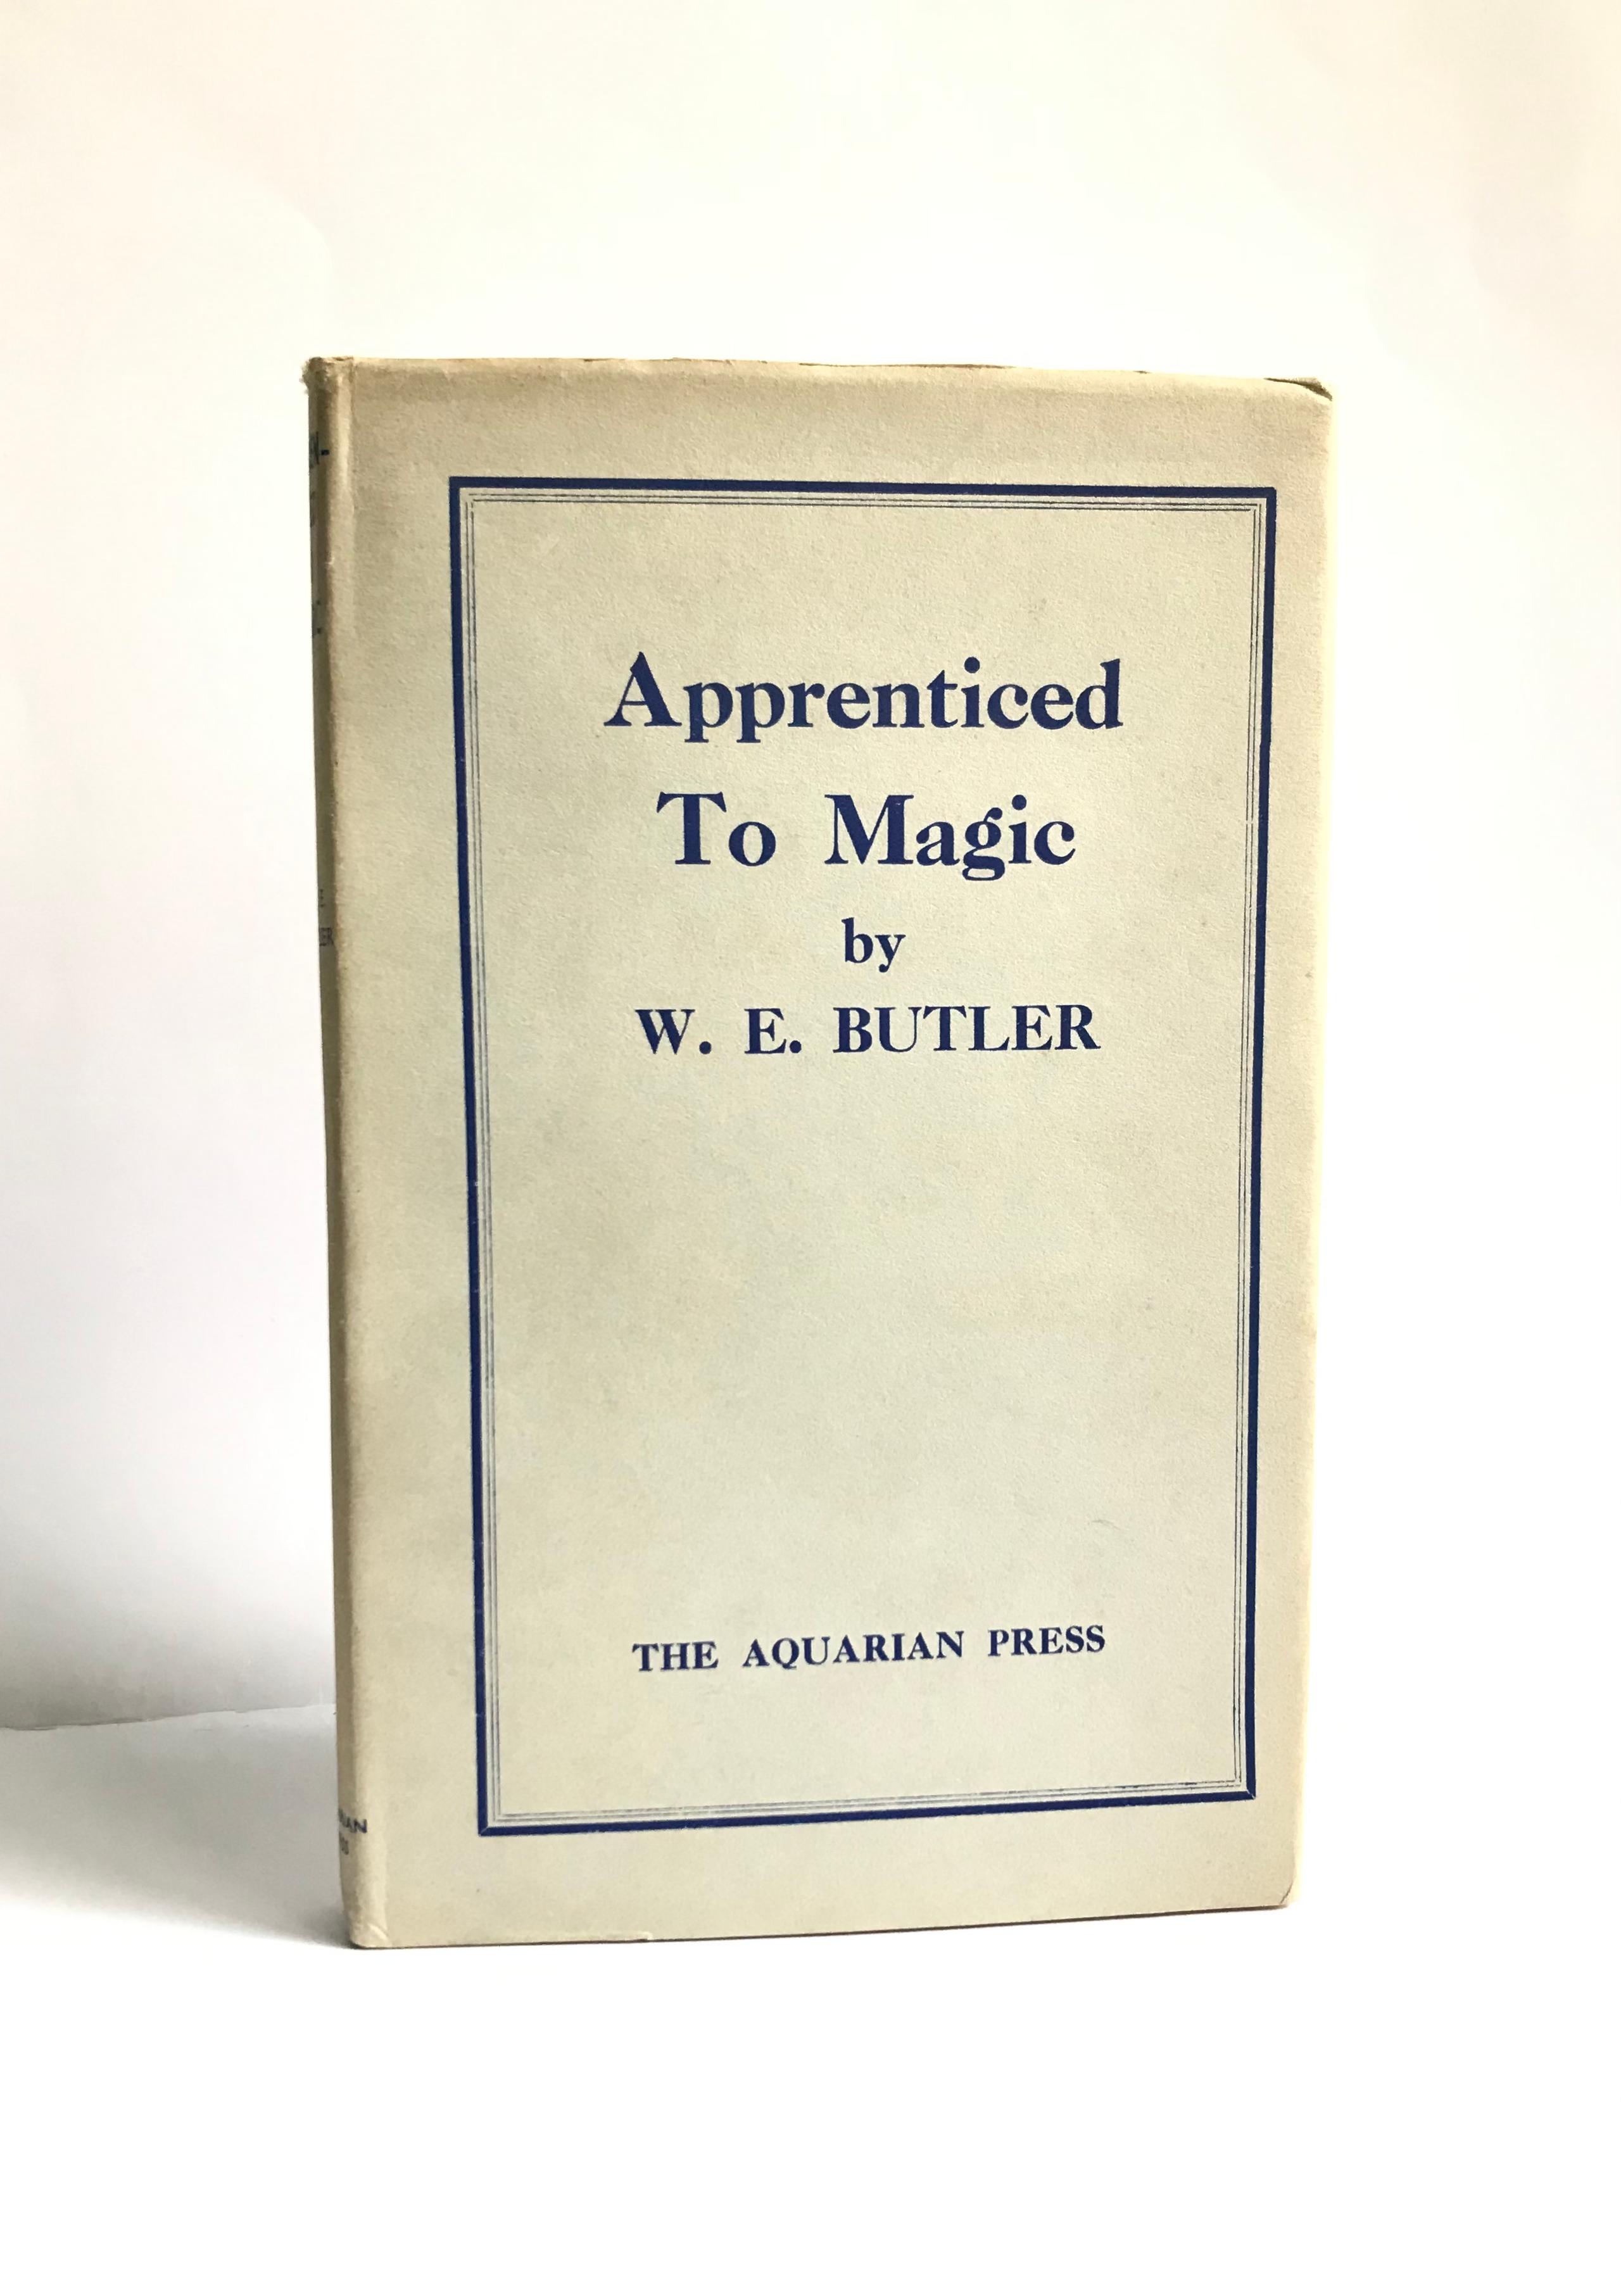 Apprenticed To Magic by W. E. Butler